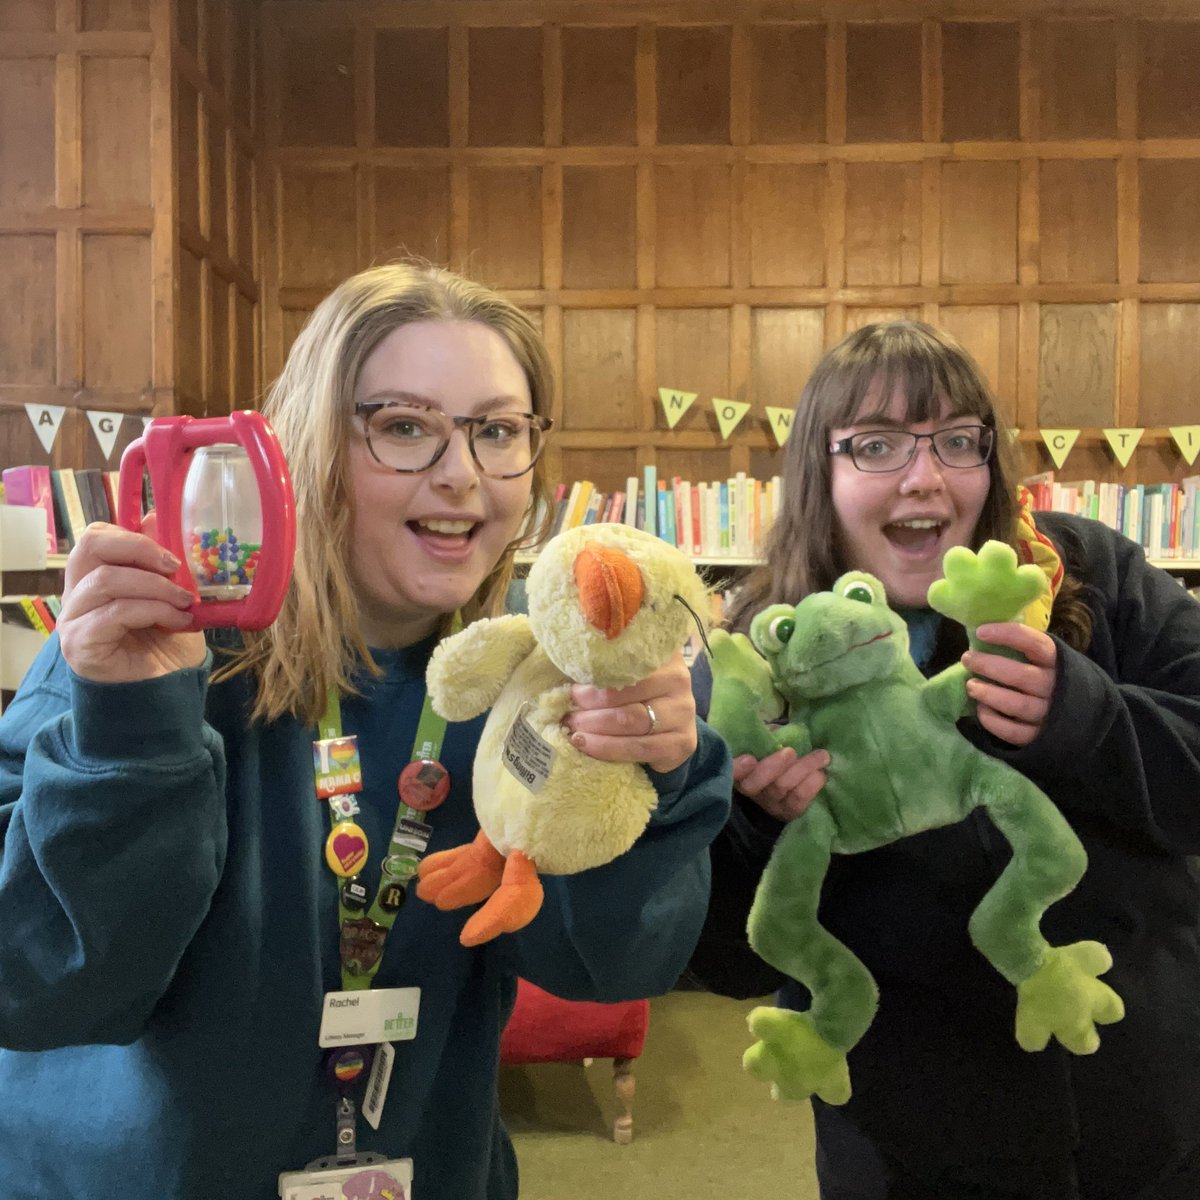 We had a lovely #BabyRhymeTime at #CharltonLibrary with Rachel, Megan & lots of bubbles 🫧 today! 🎶✨ Join in the fun every Monday and Thursday from 10:30-11am! 🎵 Make friends, learn new songs and have fun! 🐤🐰 @Royal_Greenwich @Better_UK @greenwichlibs #LoveYourLibrary